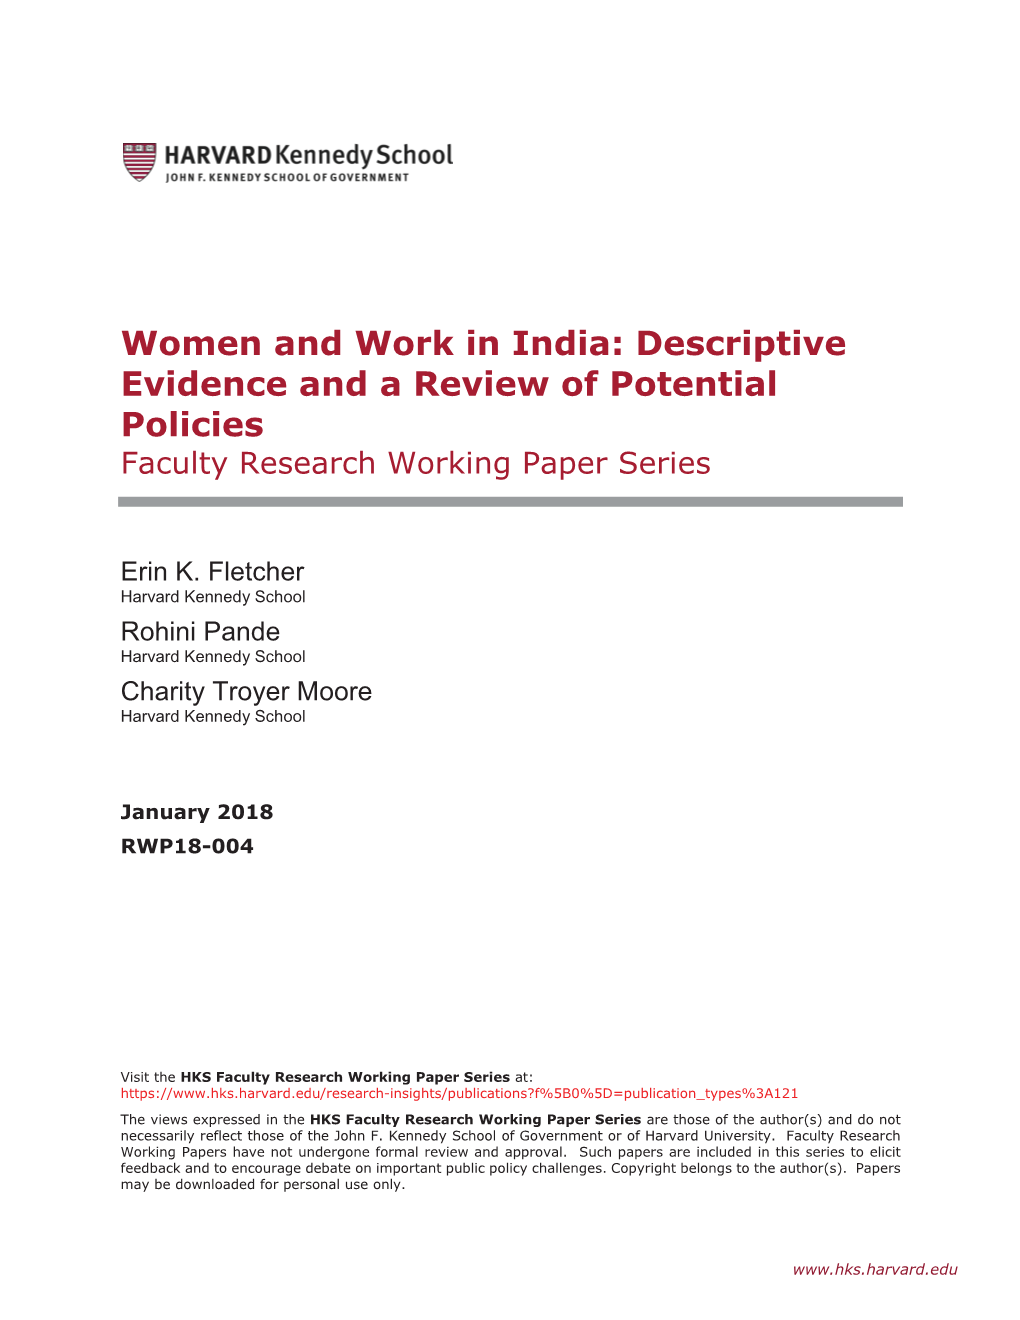 Women and Work in India: Descriptive Evidence and a Review of Potential Policies Faculty Research Working Paper Series